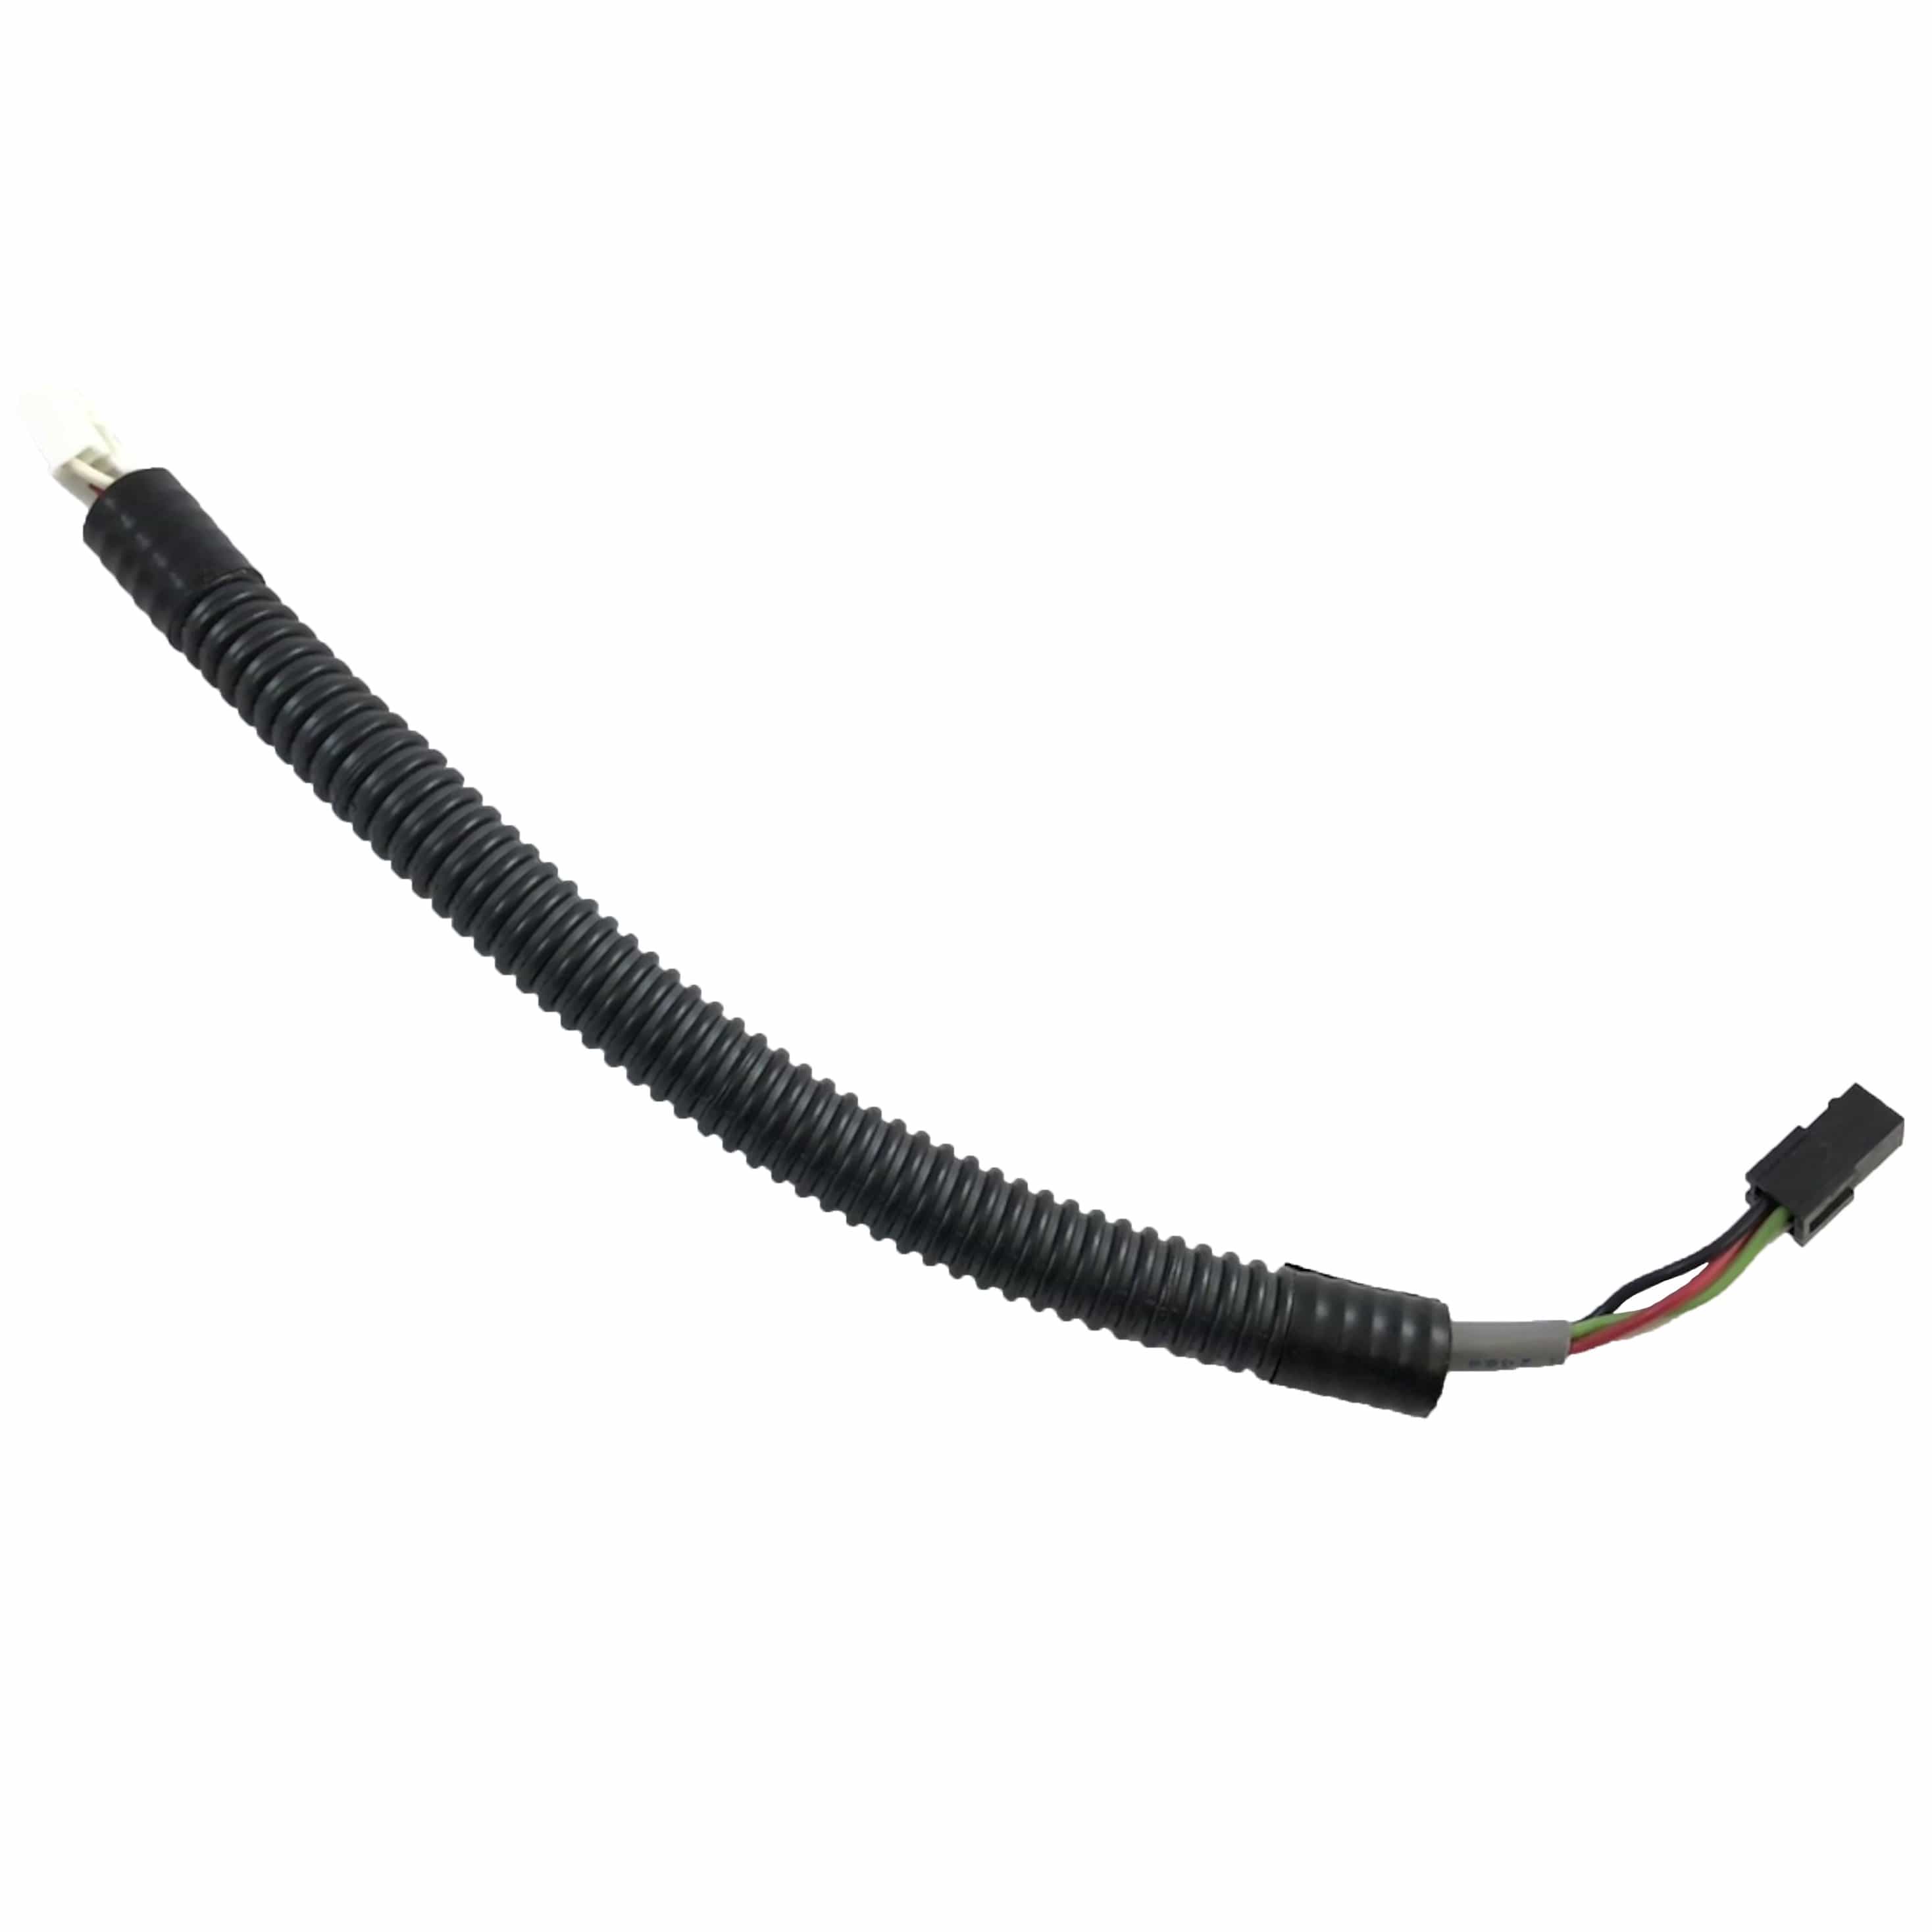 Atwood 66928 (Lippert 678831) Jumper Cable 9